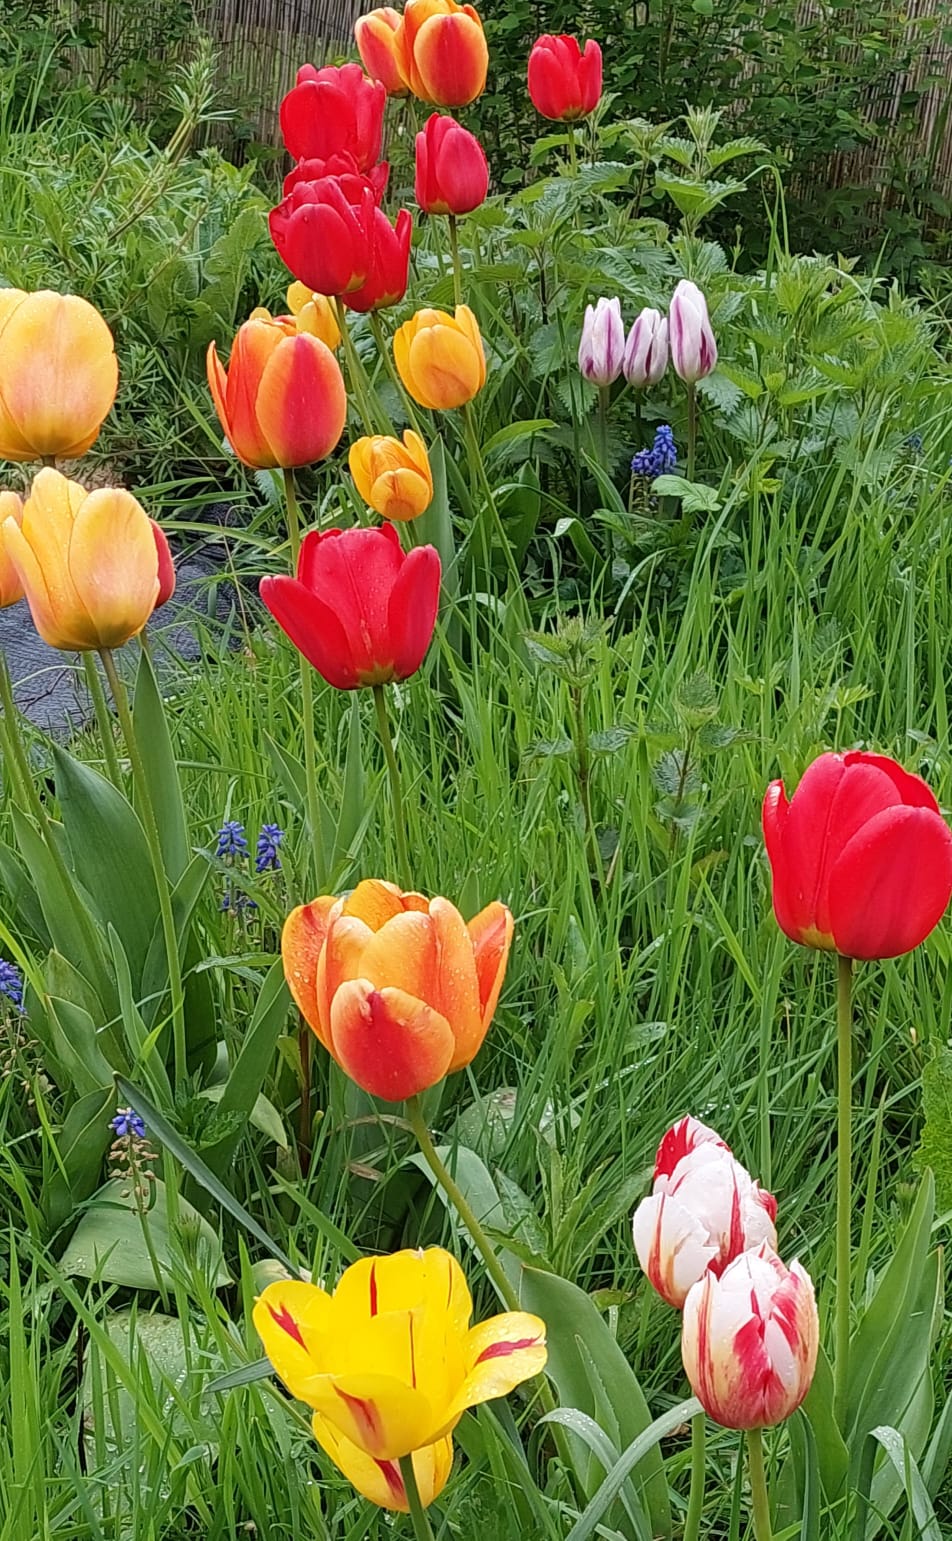 A field of brightly coloured tulips